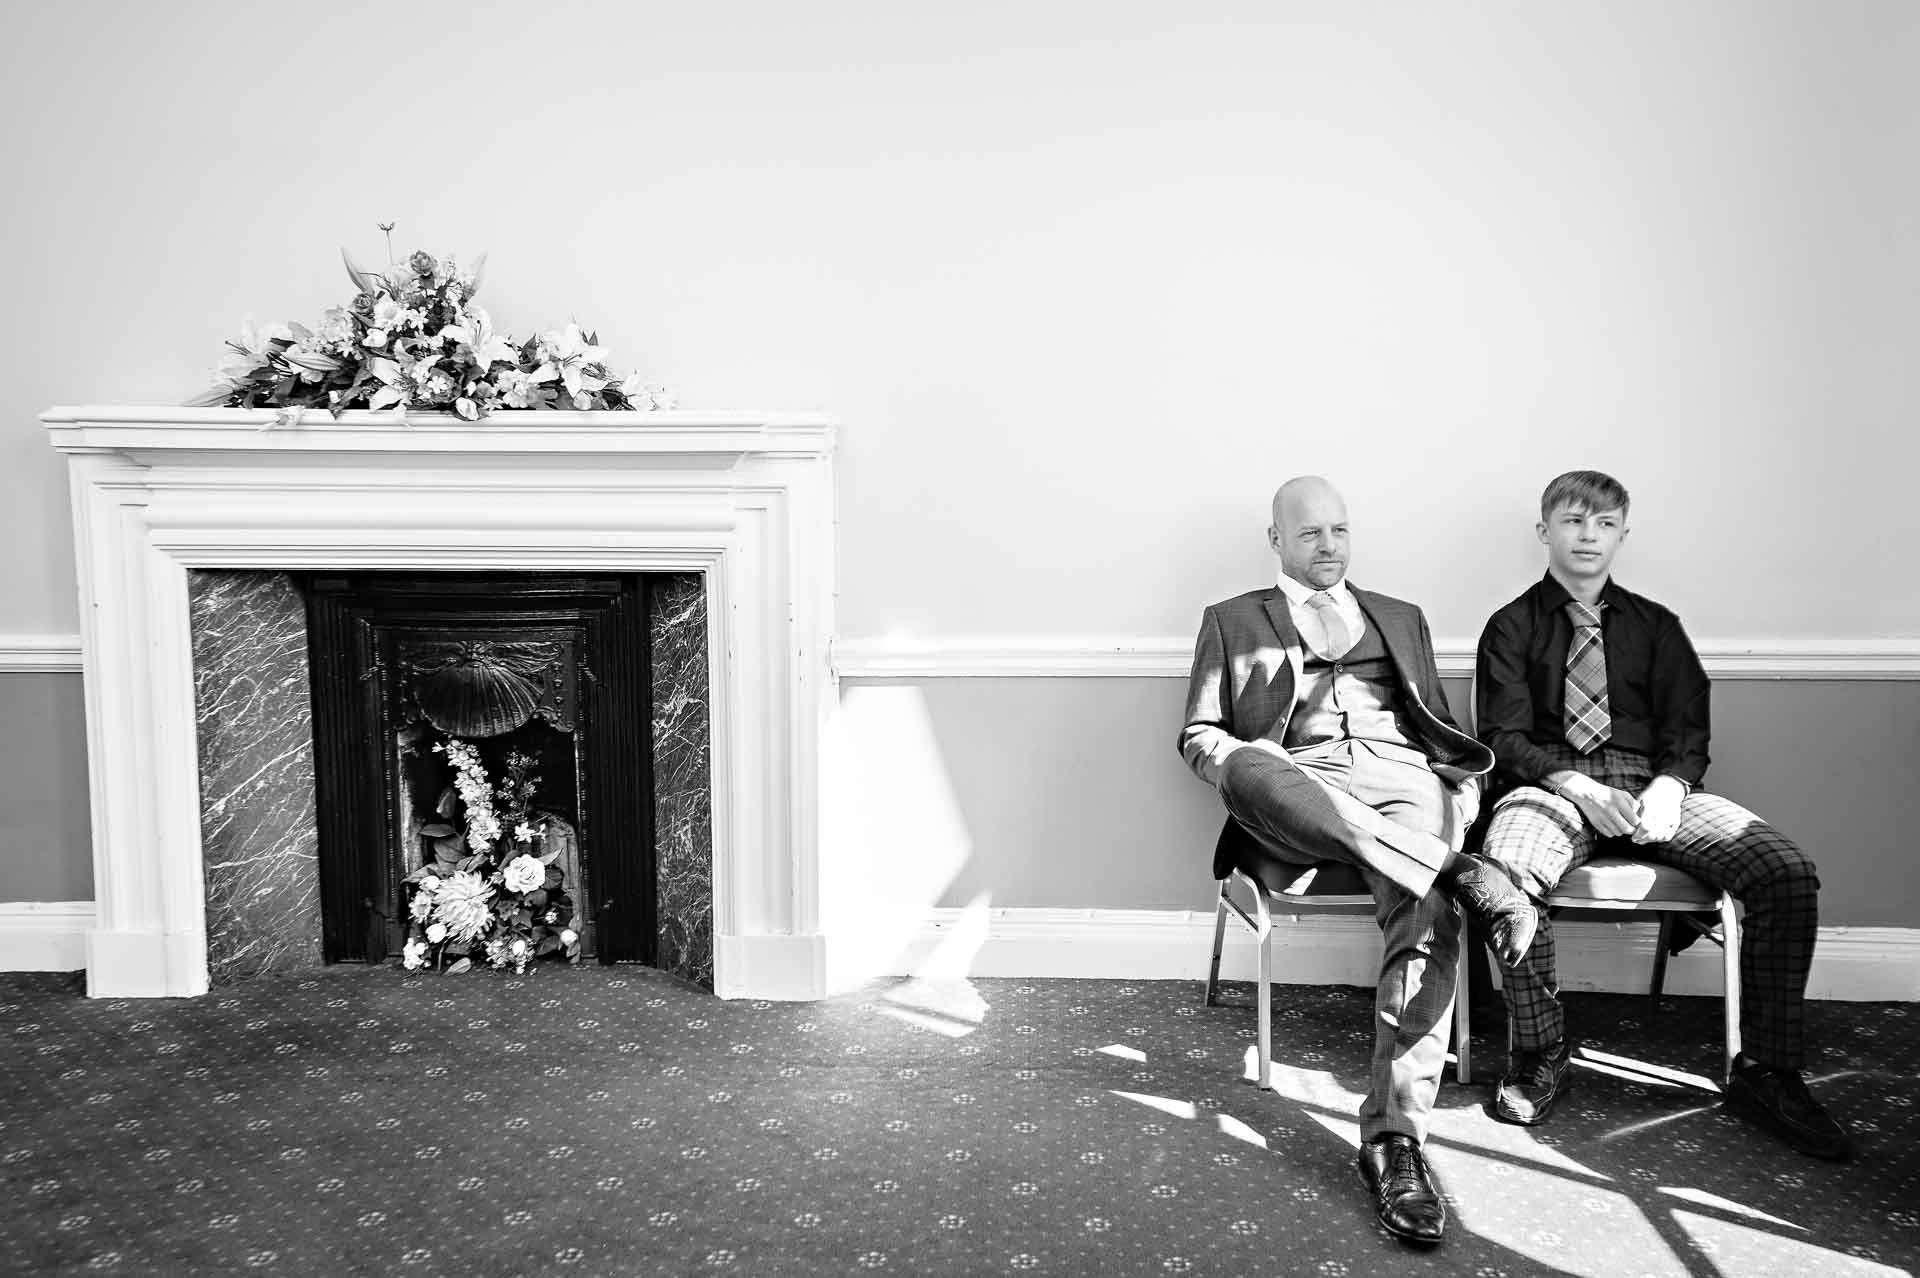 Two men sitting in waiting room of Cardiff City Hall next to ornate fireplace